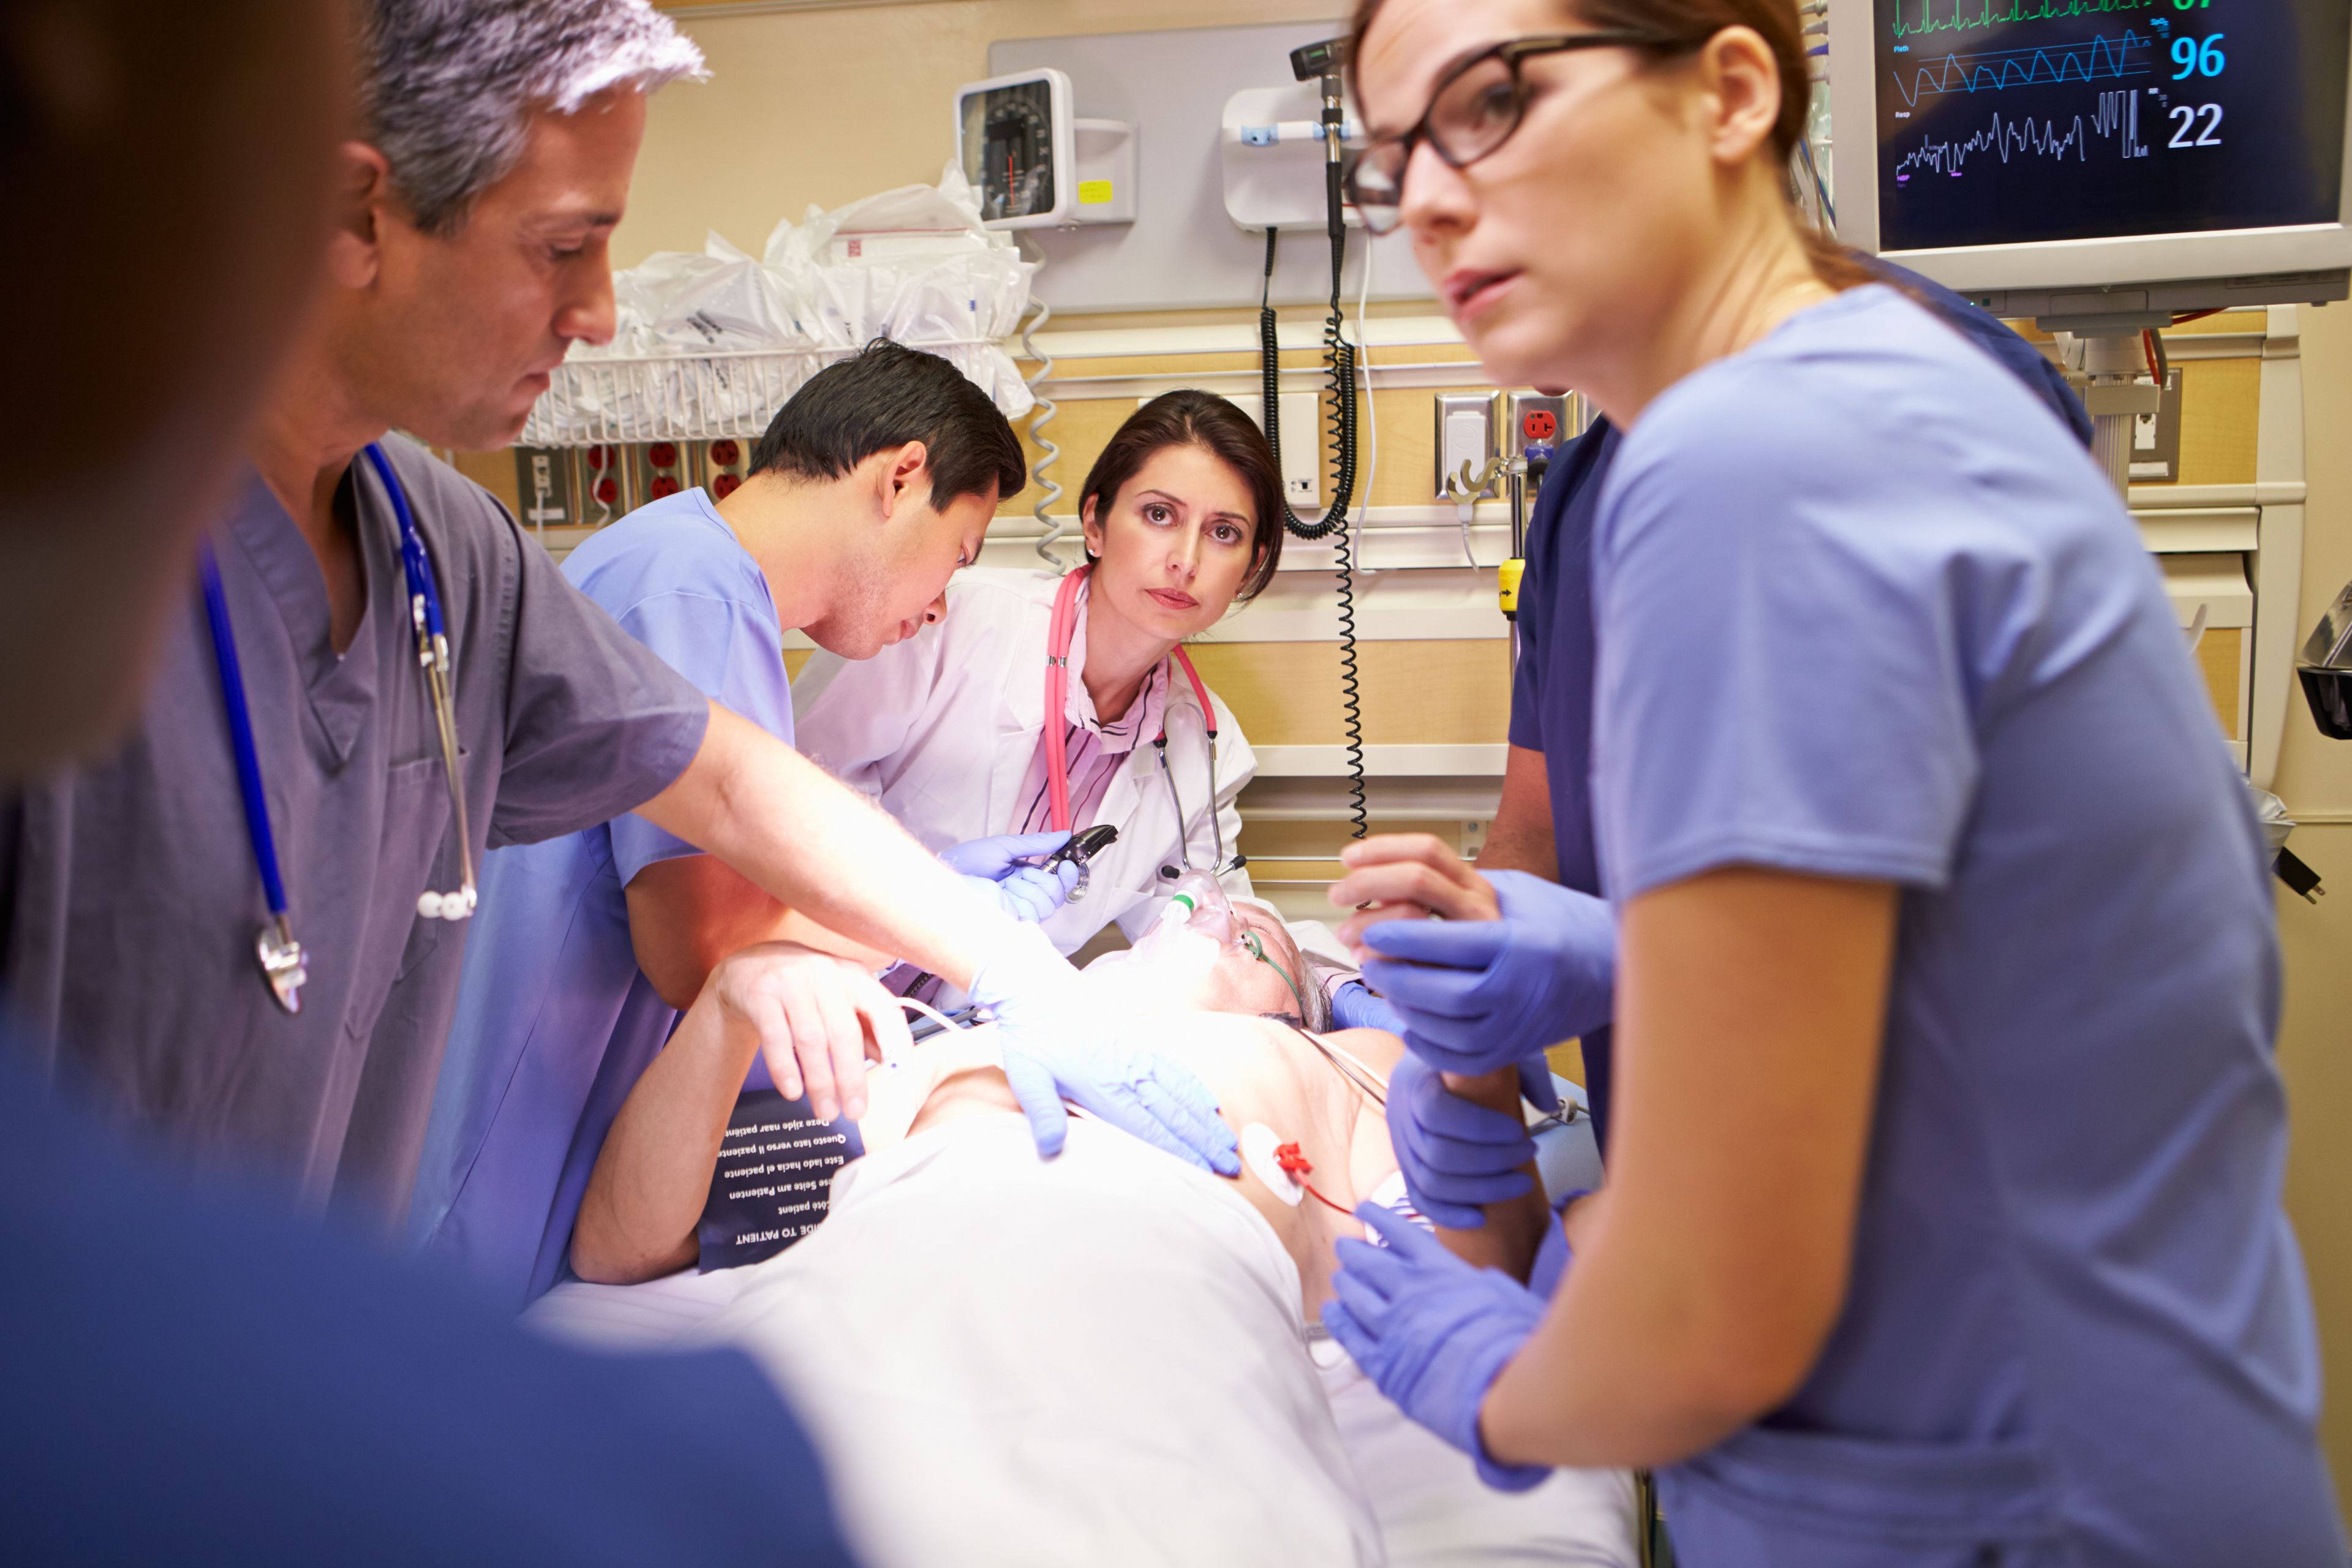 Emergency Department Radiology: Study Shows Higher Imaging Orders by NPPs